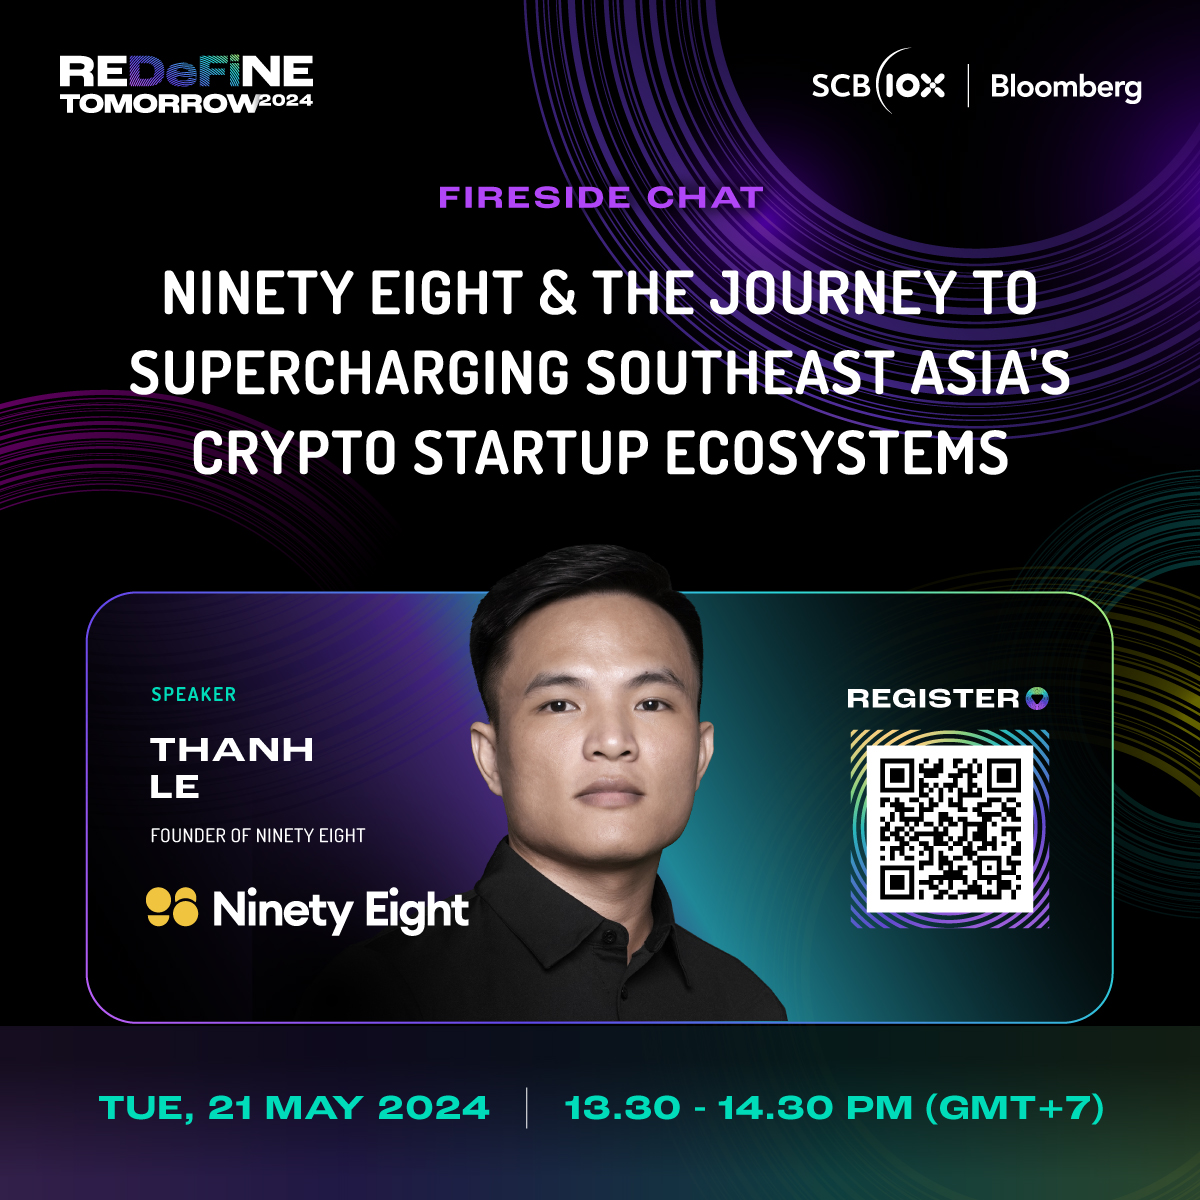 Meet the speaker at #REDeFiNETOMORROW2024 / 21-22 May 2024 Fireside Chat: Ninety Eight & the Journey to Supercharging Southeast Asia's Crypto Startup Ecosystems @imlethanh98 of @ninetyeight_hq Free ticket: bloombergevents.com/SCB10x_2024